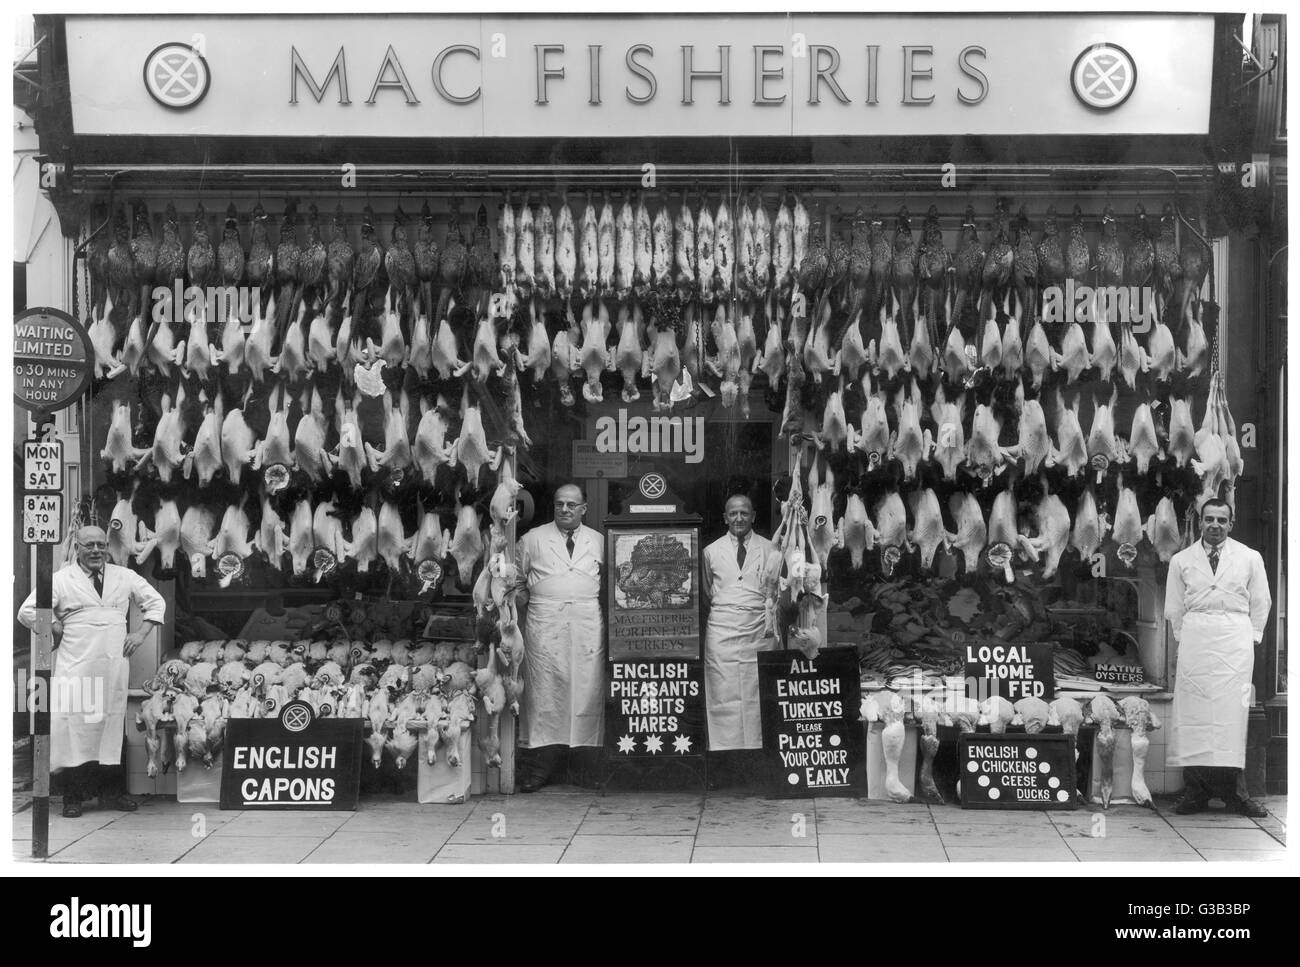 MAC FISHERIES POULTERERS Stock Photo